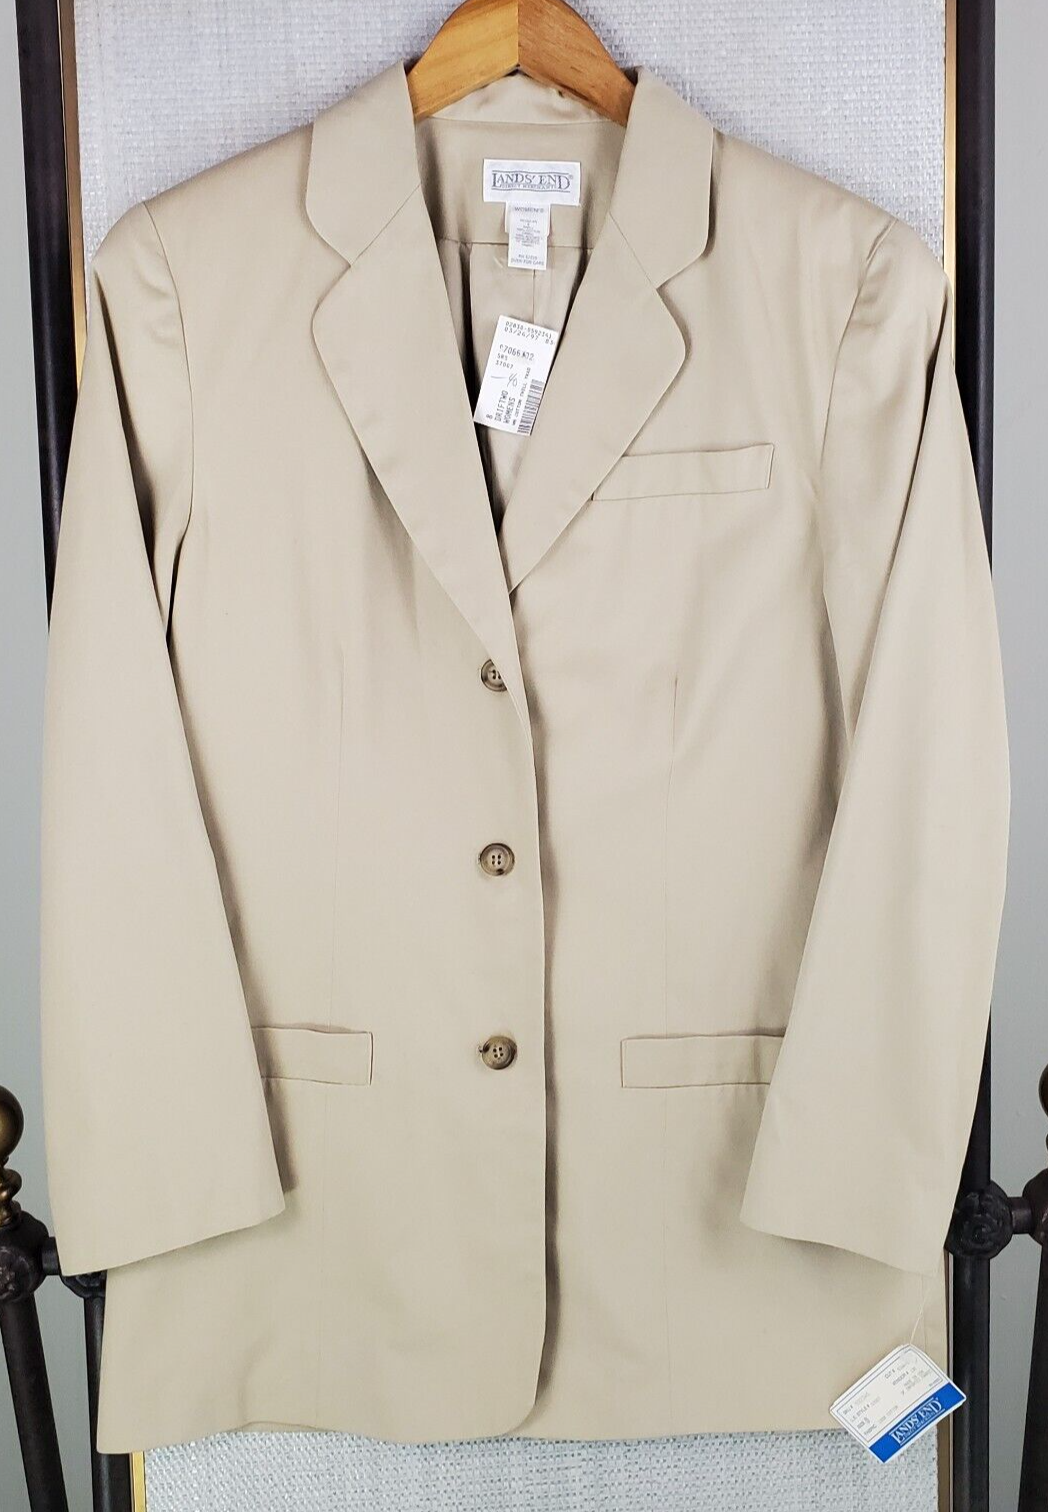 NEW VTG LANDS END Deadstock Womens Size Medium Blazer Jacket Made in USA Khaki Lands' End long sleeve cuff collar, button front pockets, notch lapel, three 3 button, blazer sportcoat jacket, vintage, made in usa america, women's size, twill